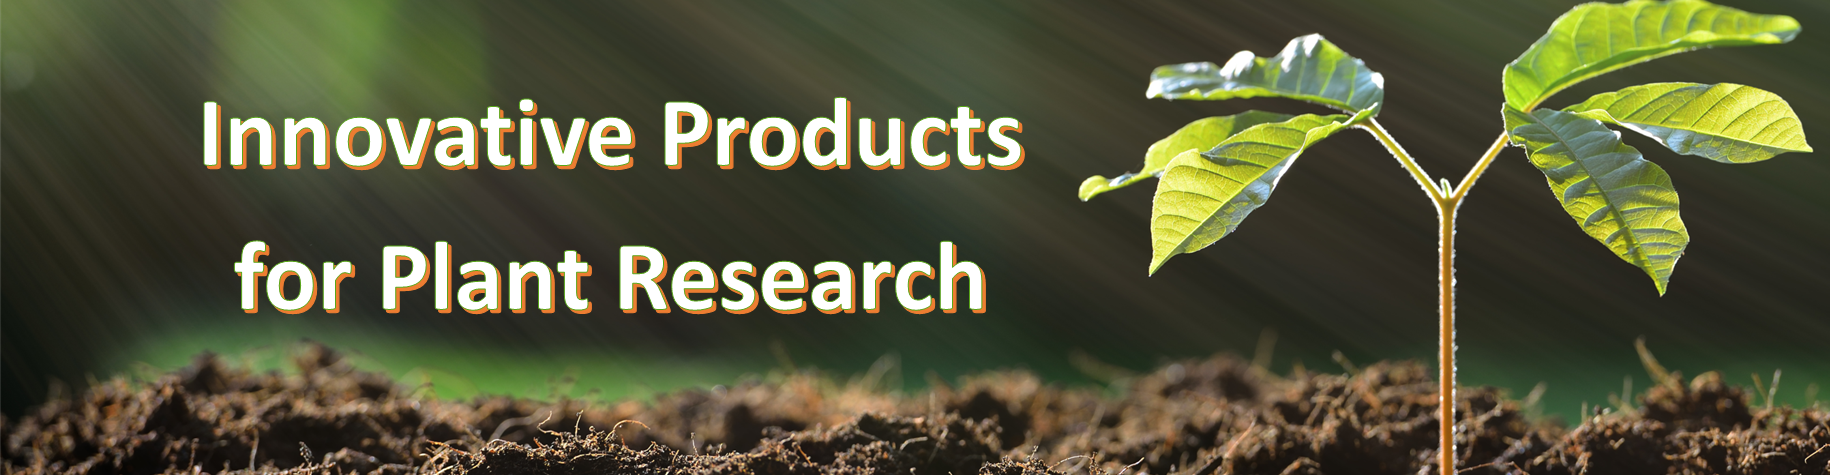 innovative producs for plant research